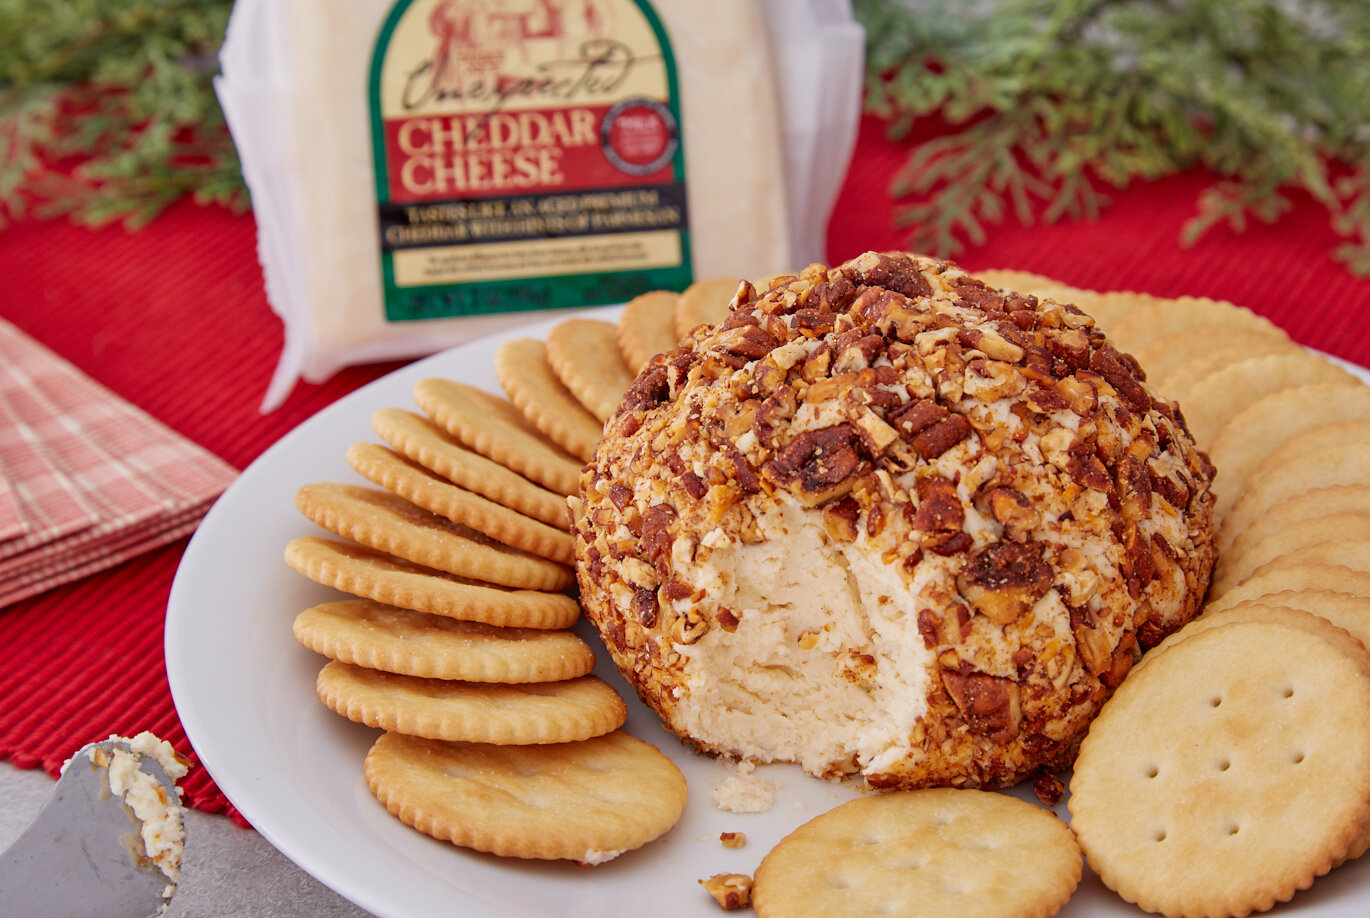 Trader Joe's Unexpected Cheddar Cheese; cheese ball recipe surrounded by savory golden rounds crackers